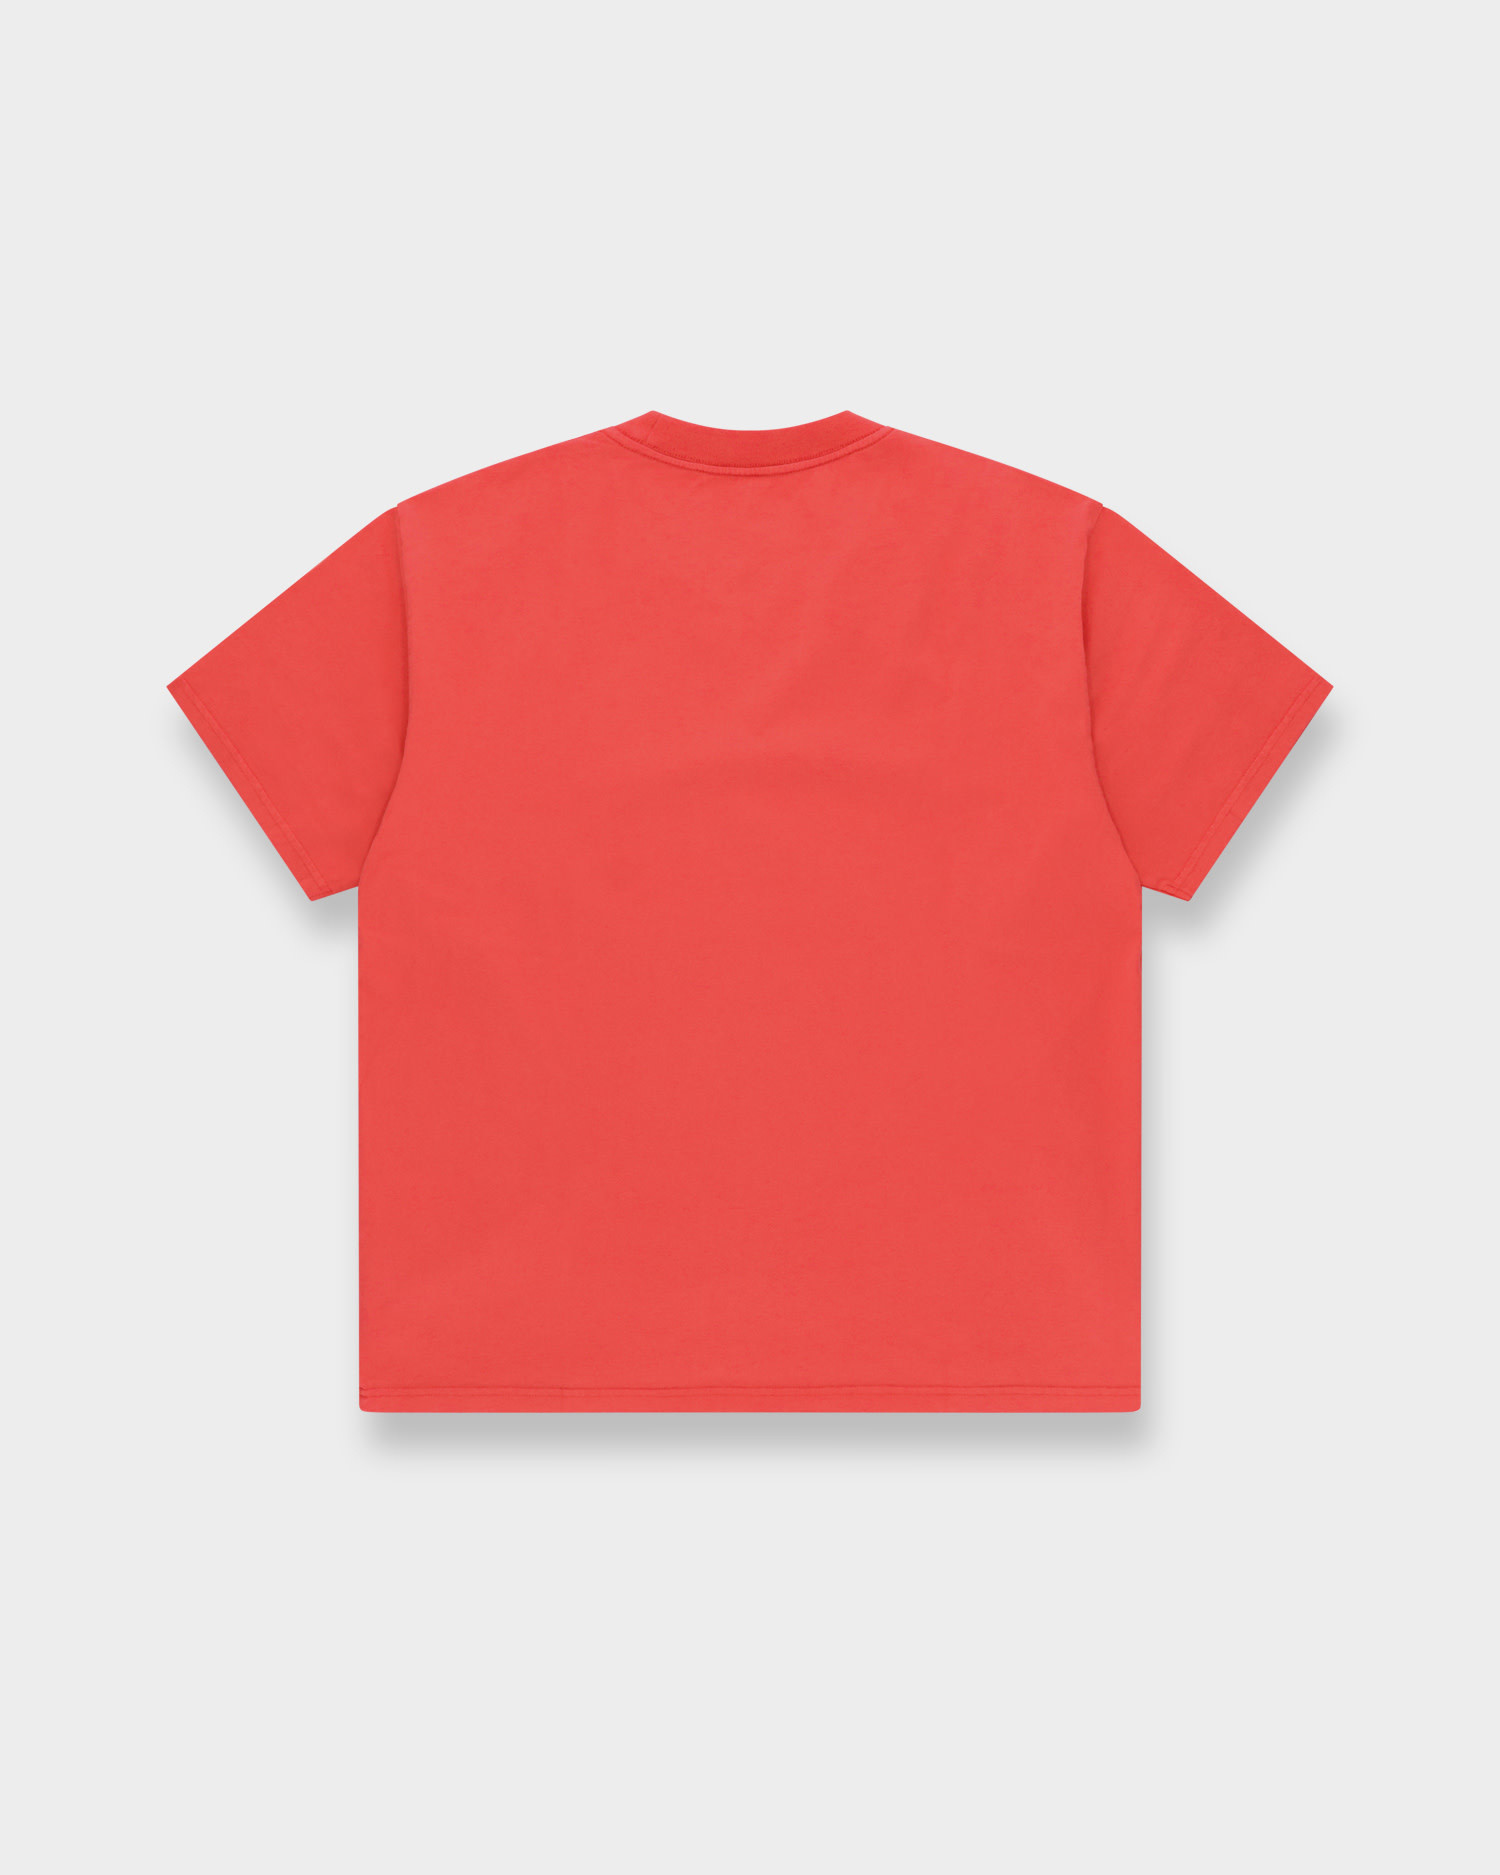 Lockwood For daily Use T-Shirt Hot Coral